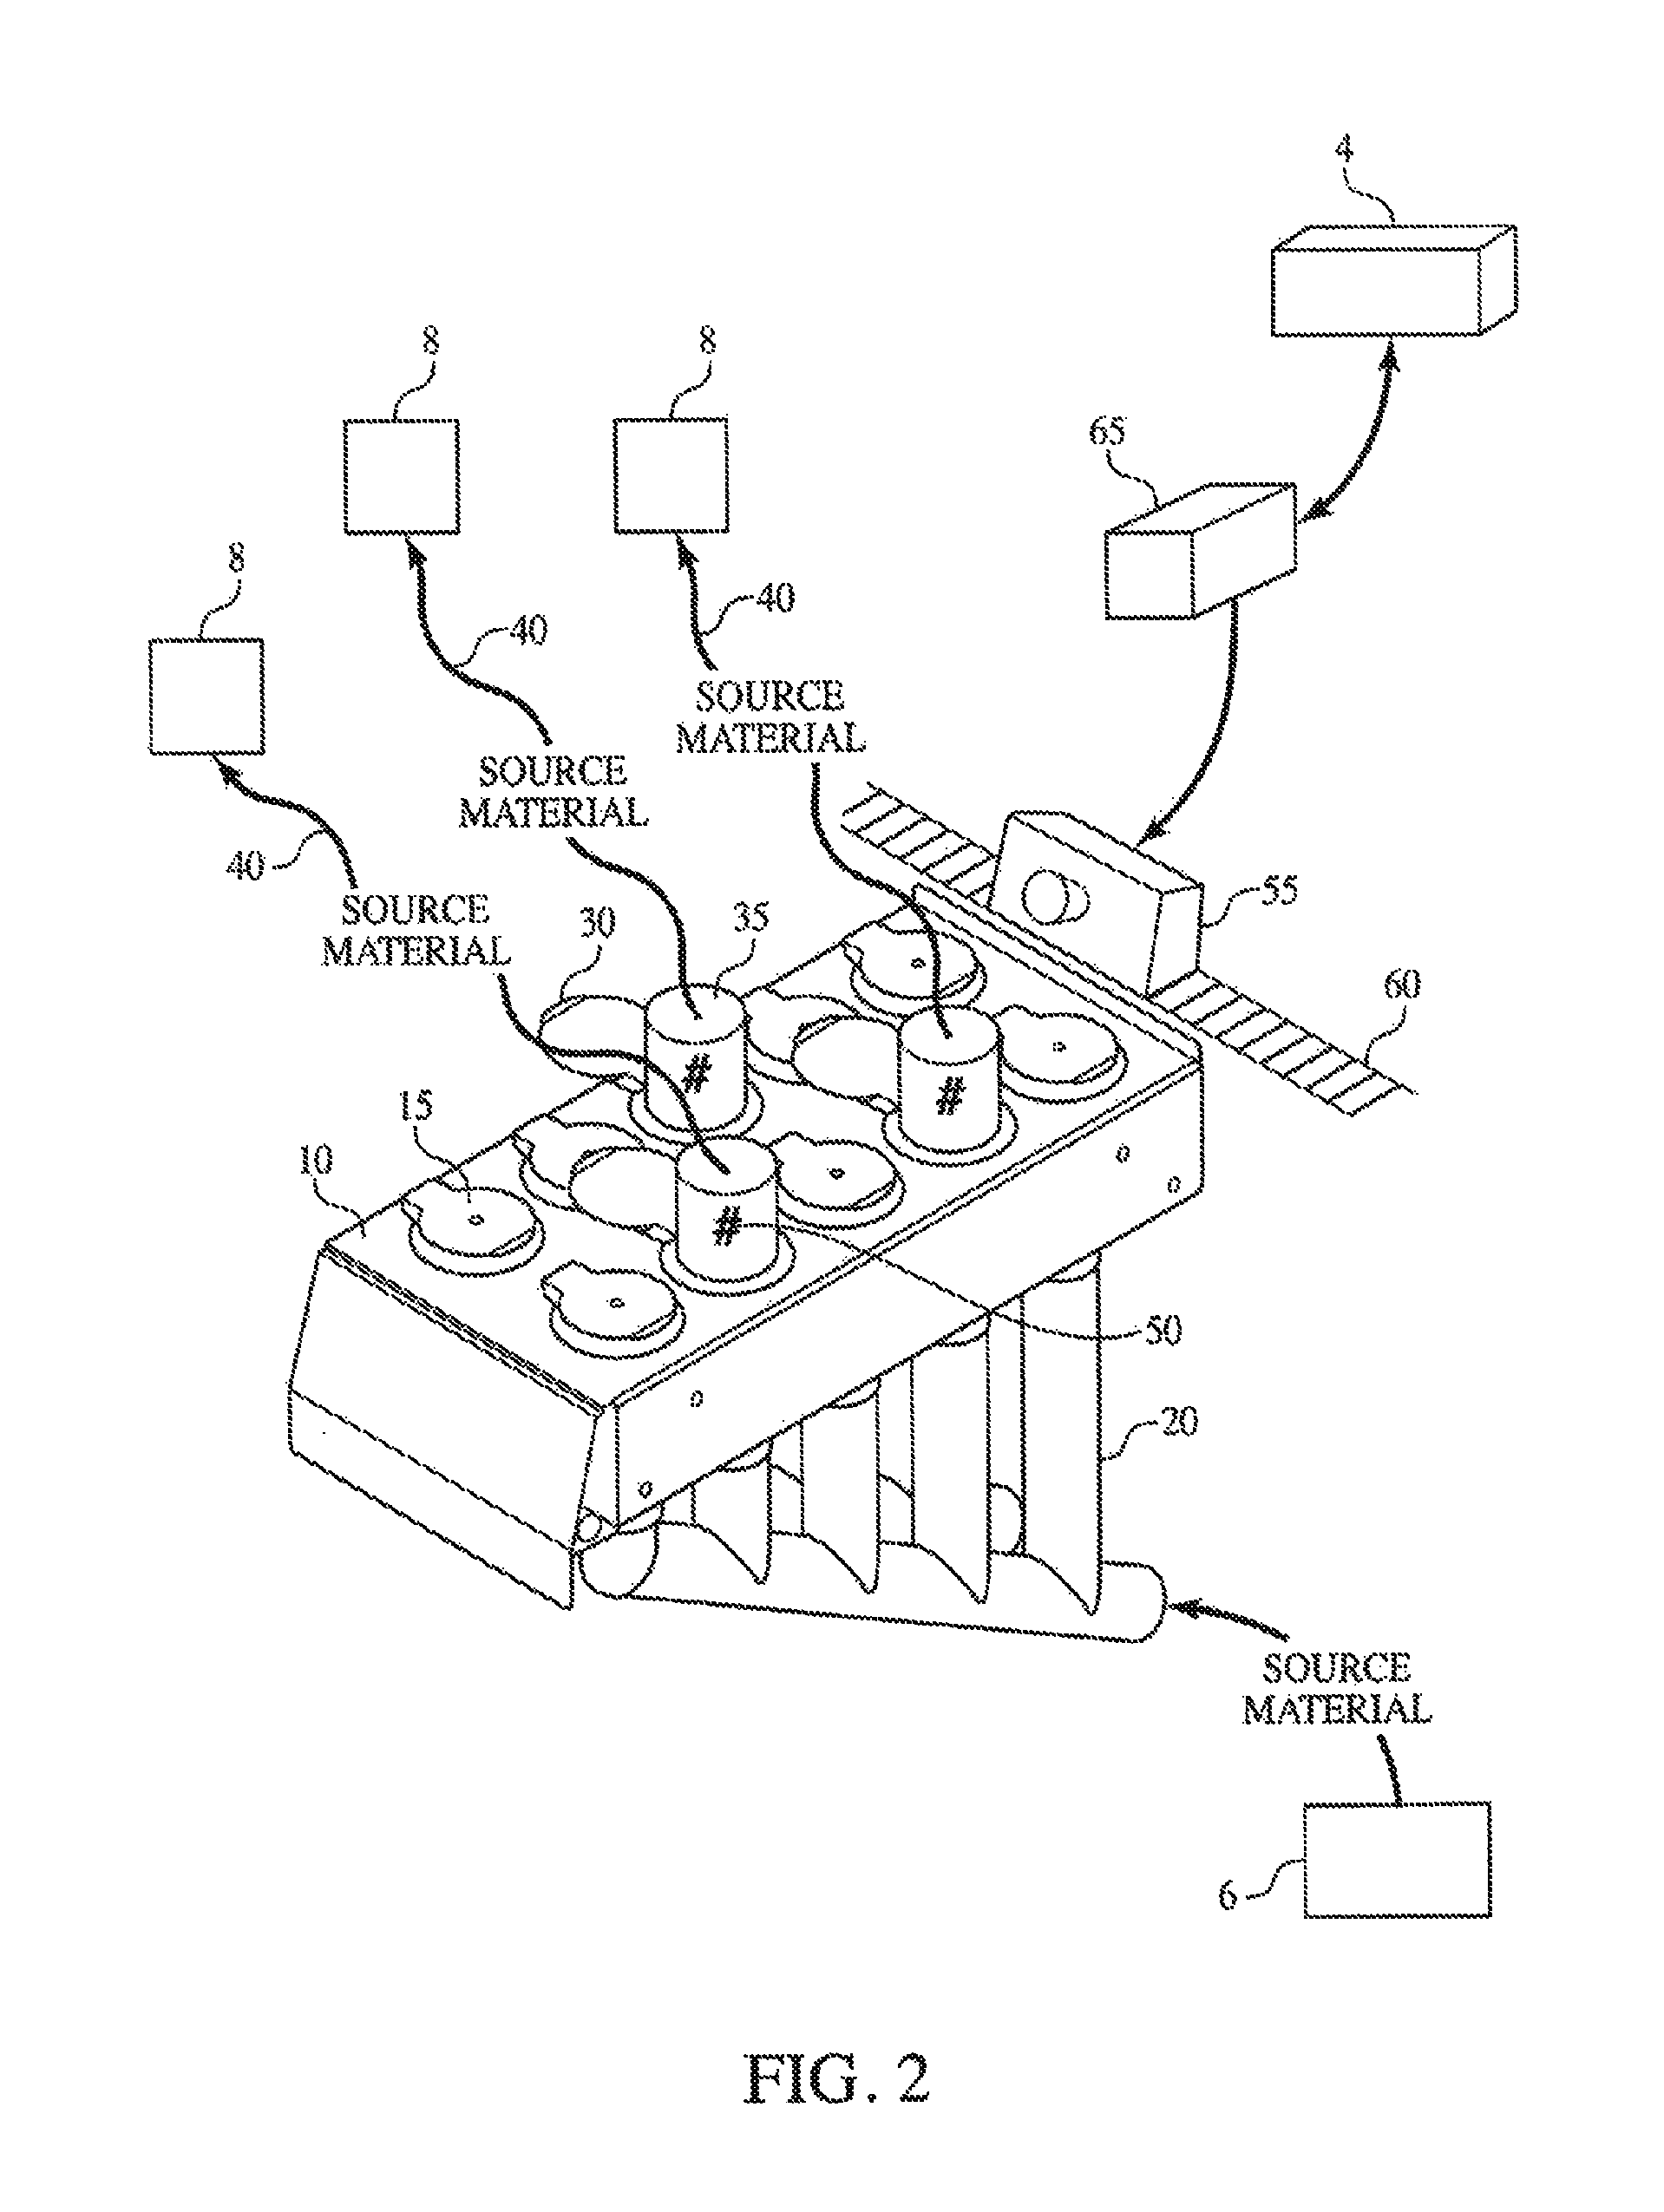 Method and process of verifying physical connections within a material handling system